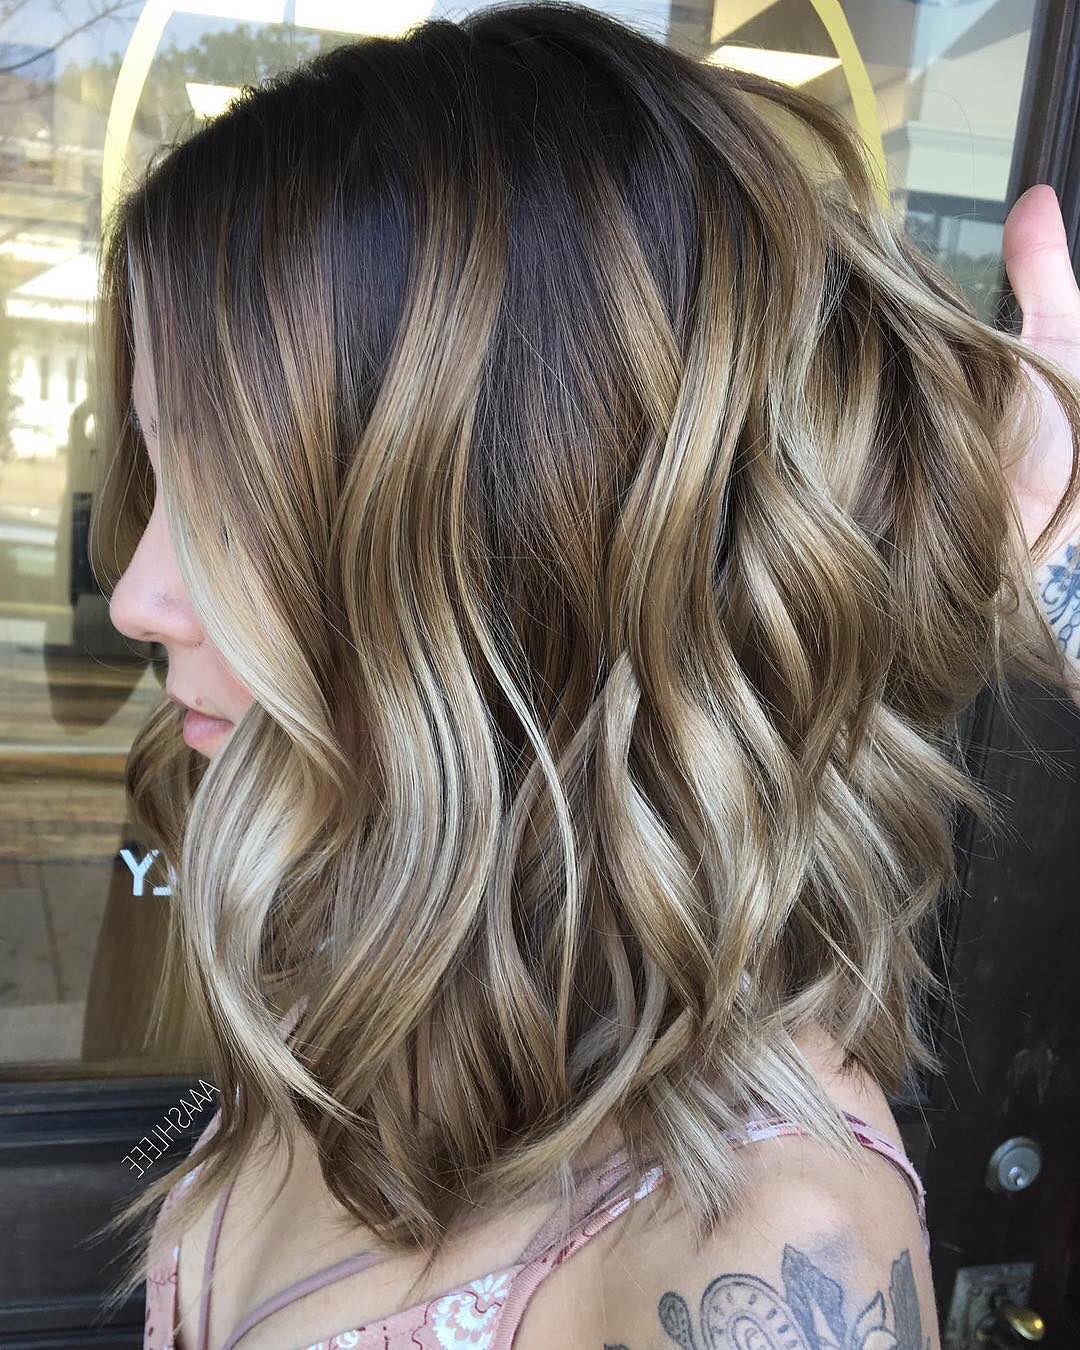 2018 Ombre Balayage Hairstyles For Chic Mid Length Hair ! 2